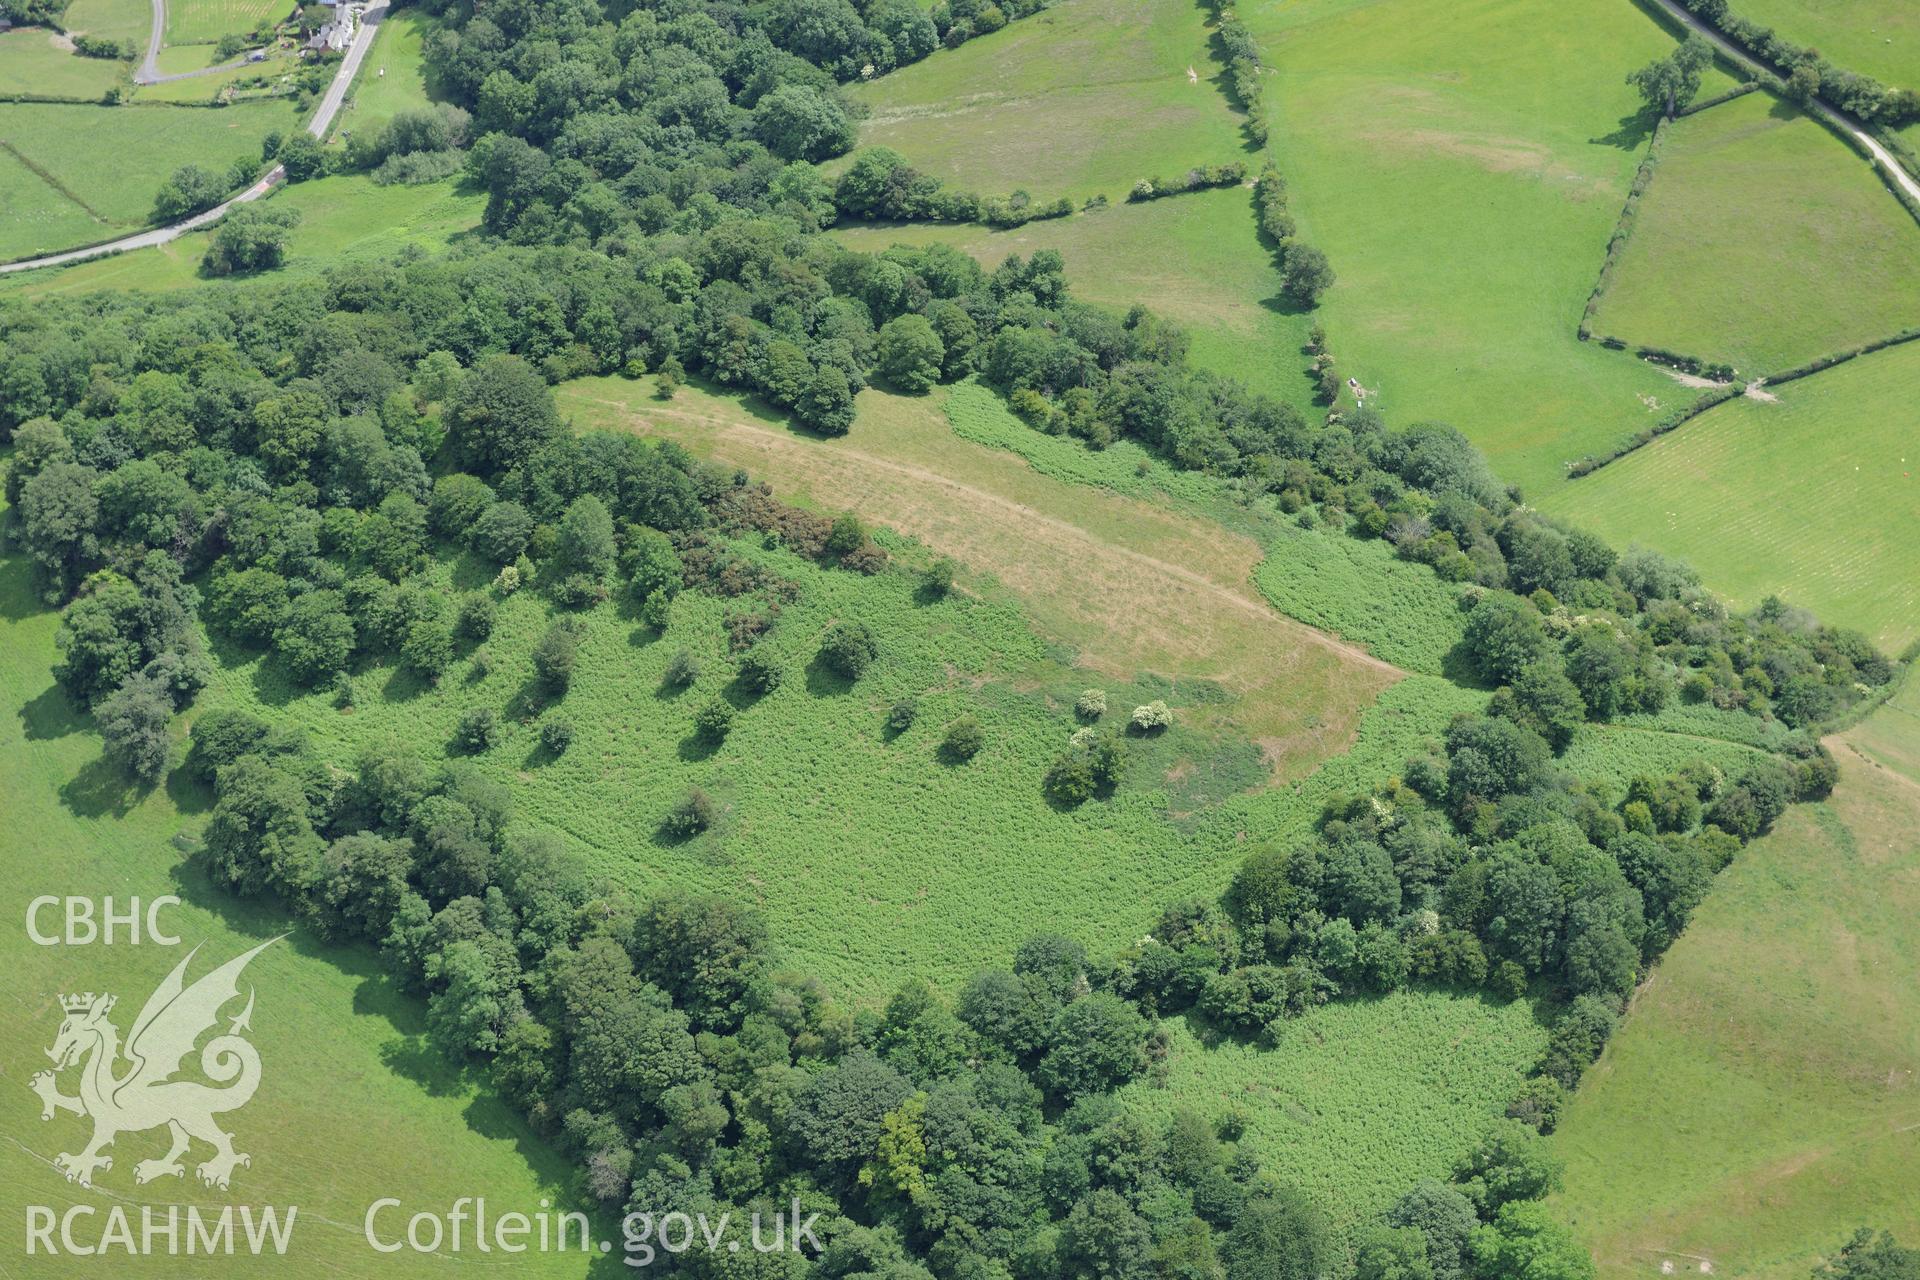 Ffridd Faldwyn hillfort, Montgomery. Oblique aerial photograph taken during the Royal Commission's programme of archaeological aerial reconnaissance by Toby Driver on 30th June 2015.